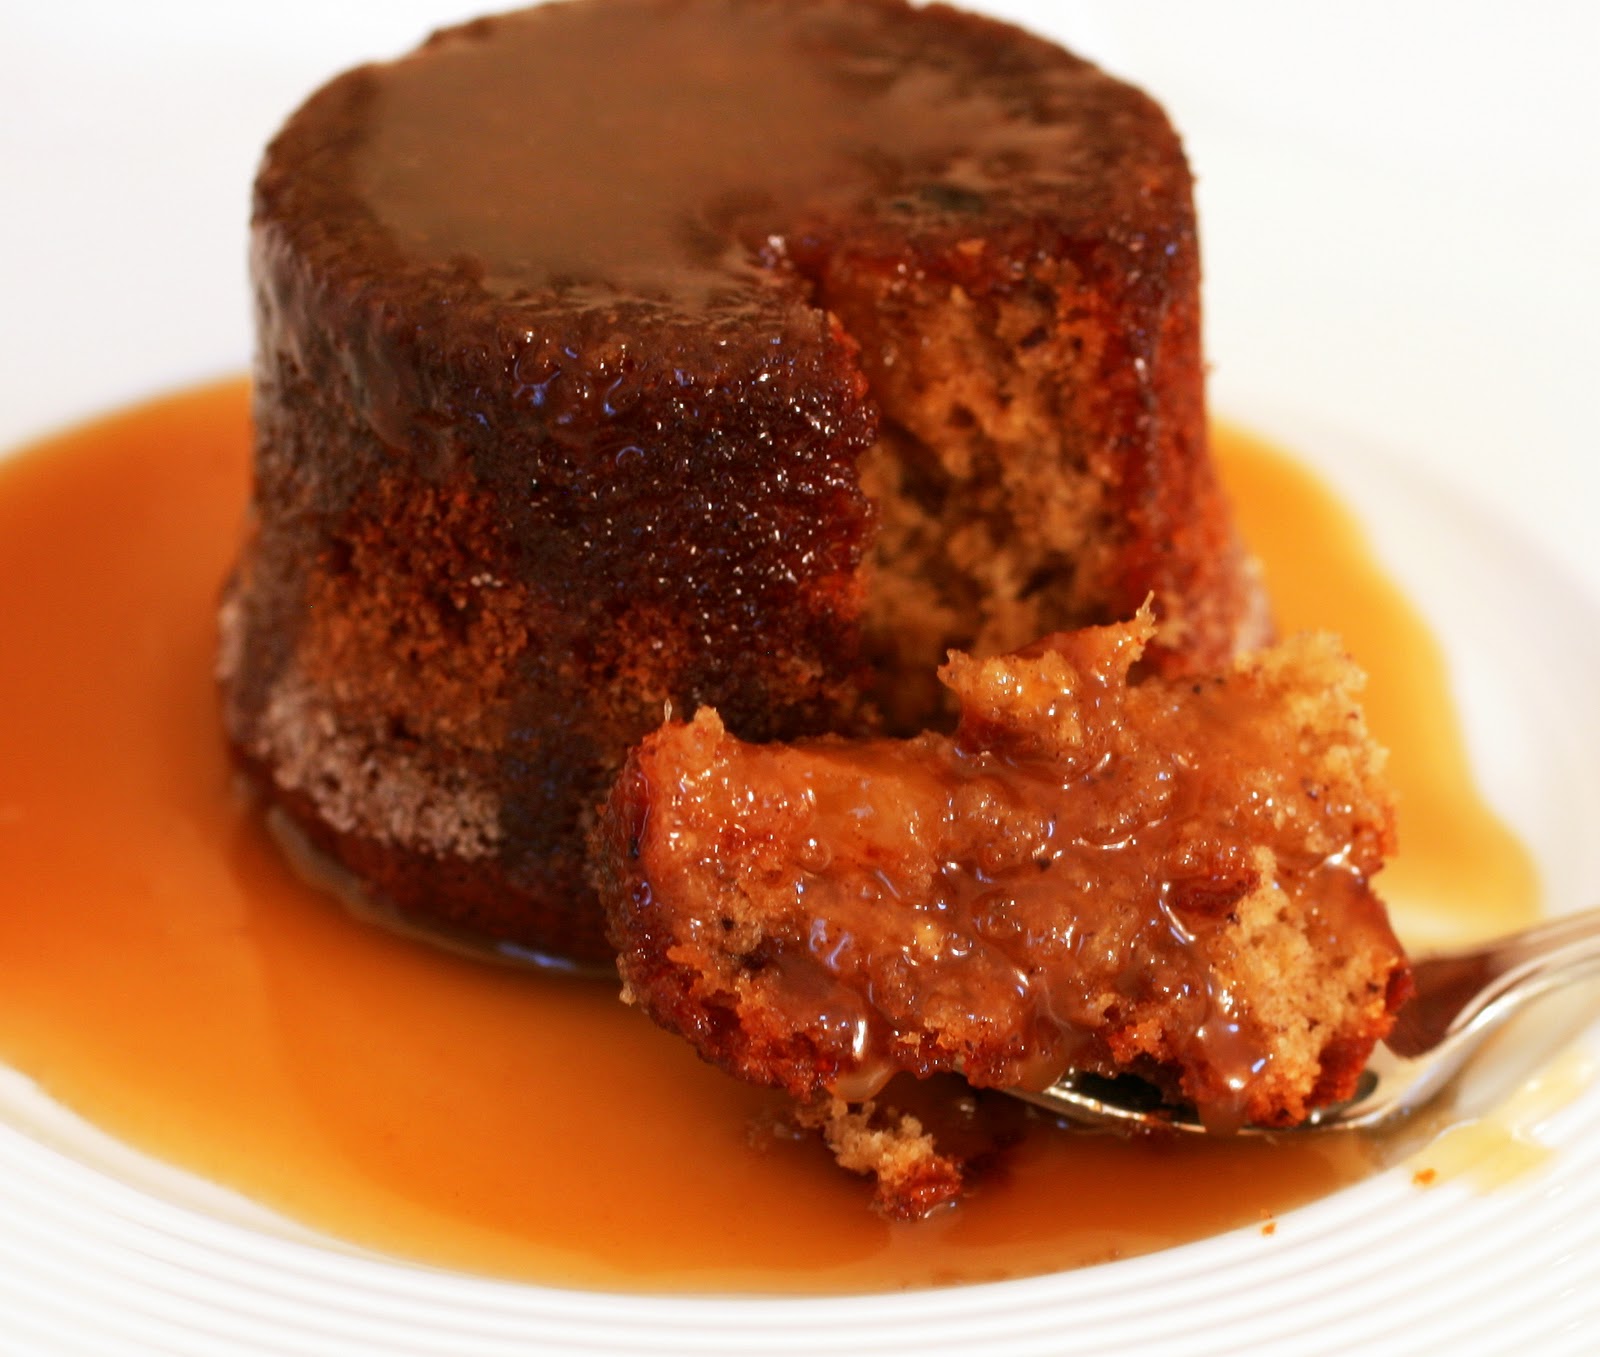 Tish Boyle Sweet Dreams: Sticky Toffee Pudding